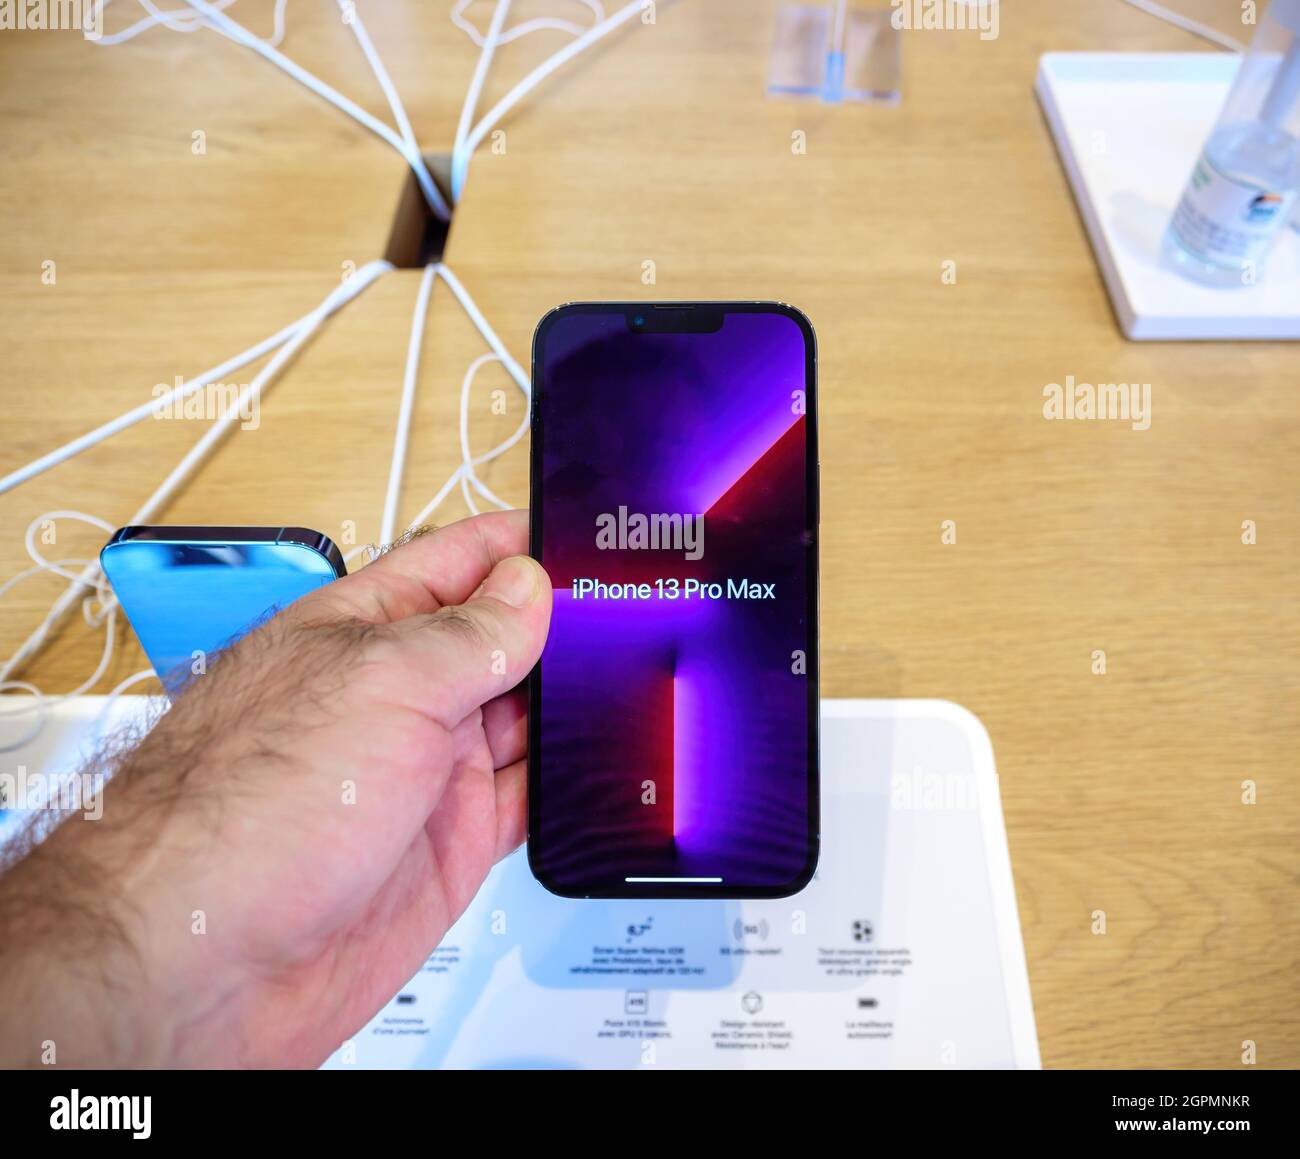 Wallpaper Display Of Iphone 13 Pro Max With Promotion 1 Hz At The Apple Store Stock Photo Alamy